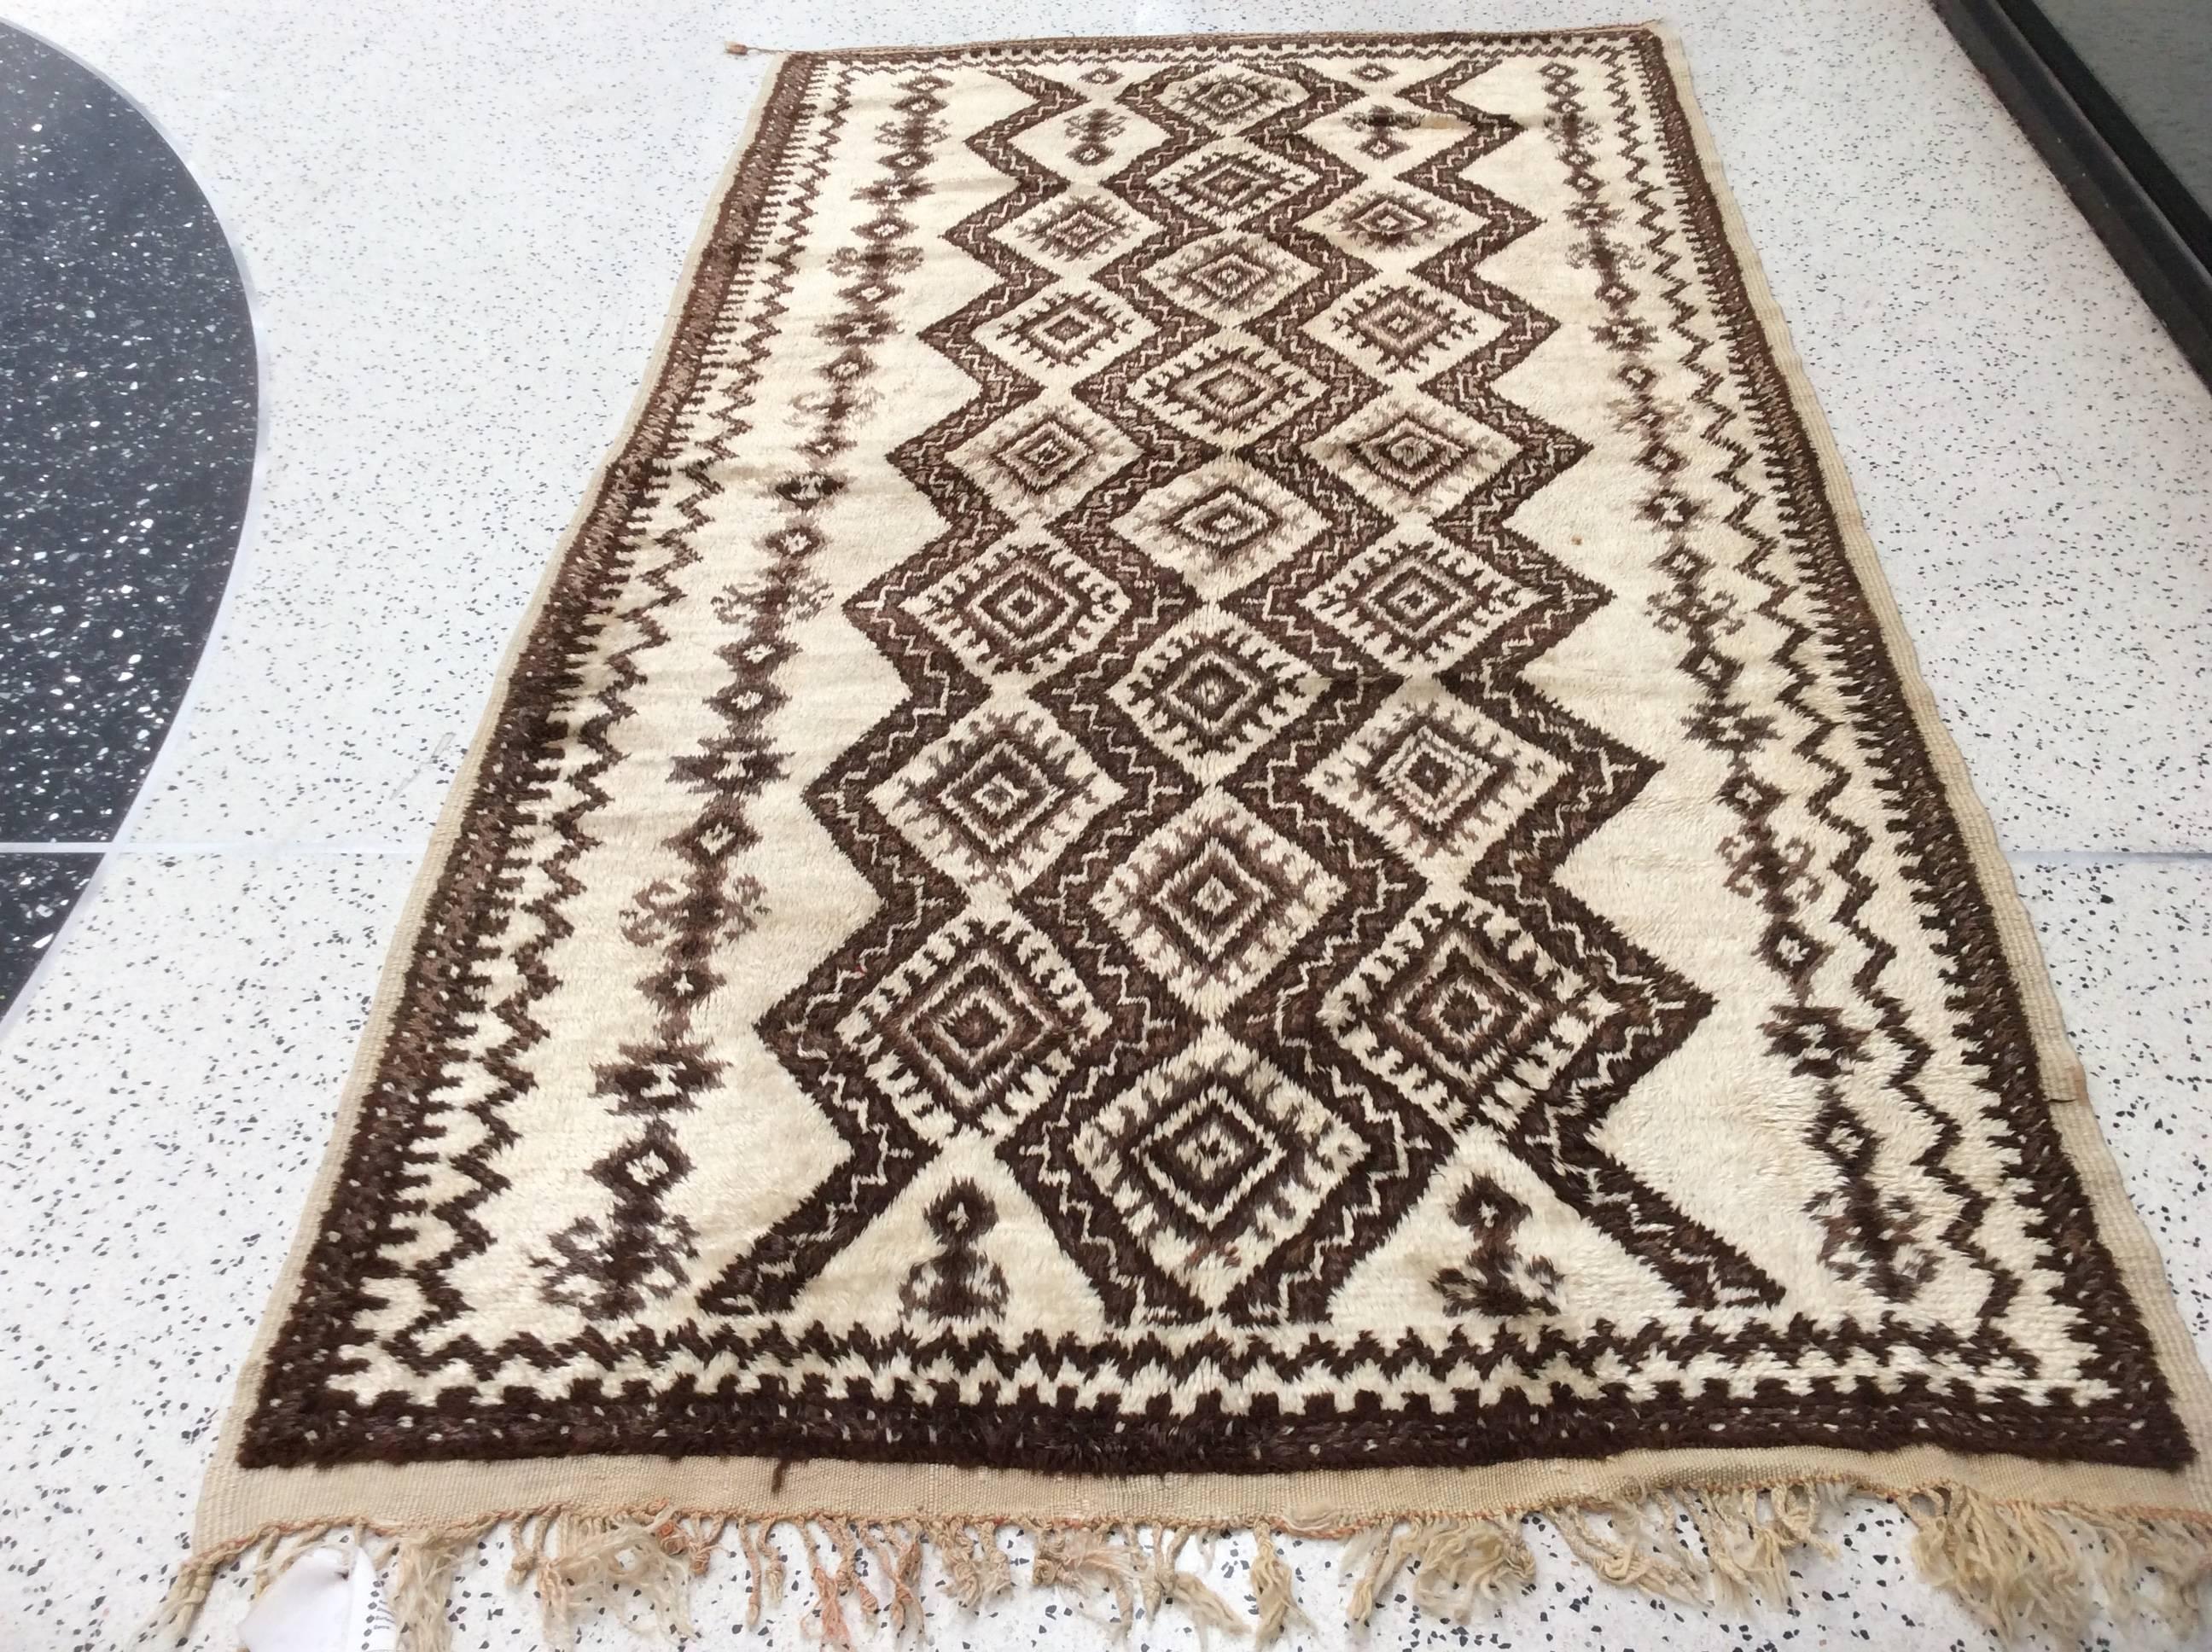 Tribal Design Moroccan rug

A weaving technique that has been passed down from generations to generations makes this Moroccan Berber rug a fine addition to your collection. It is made of luxurious hand-spun wool by High Atlas tribe, no 2 pieces are